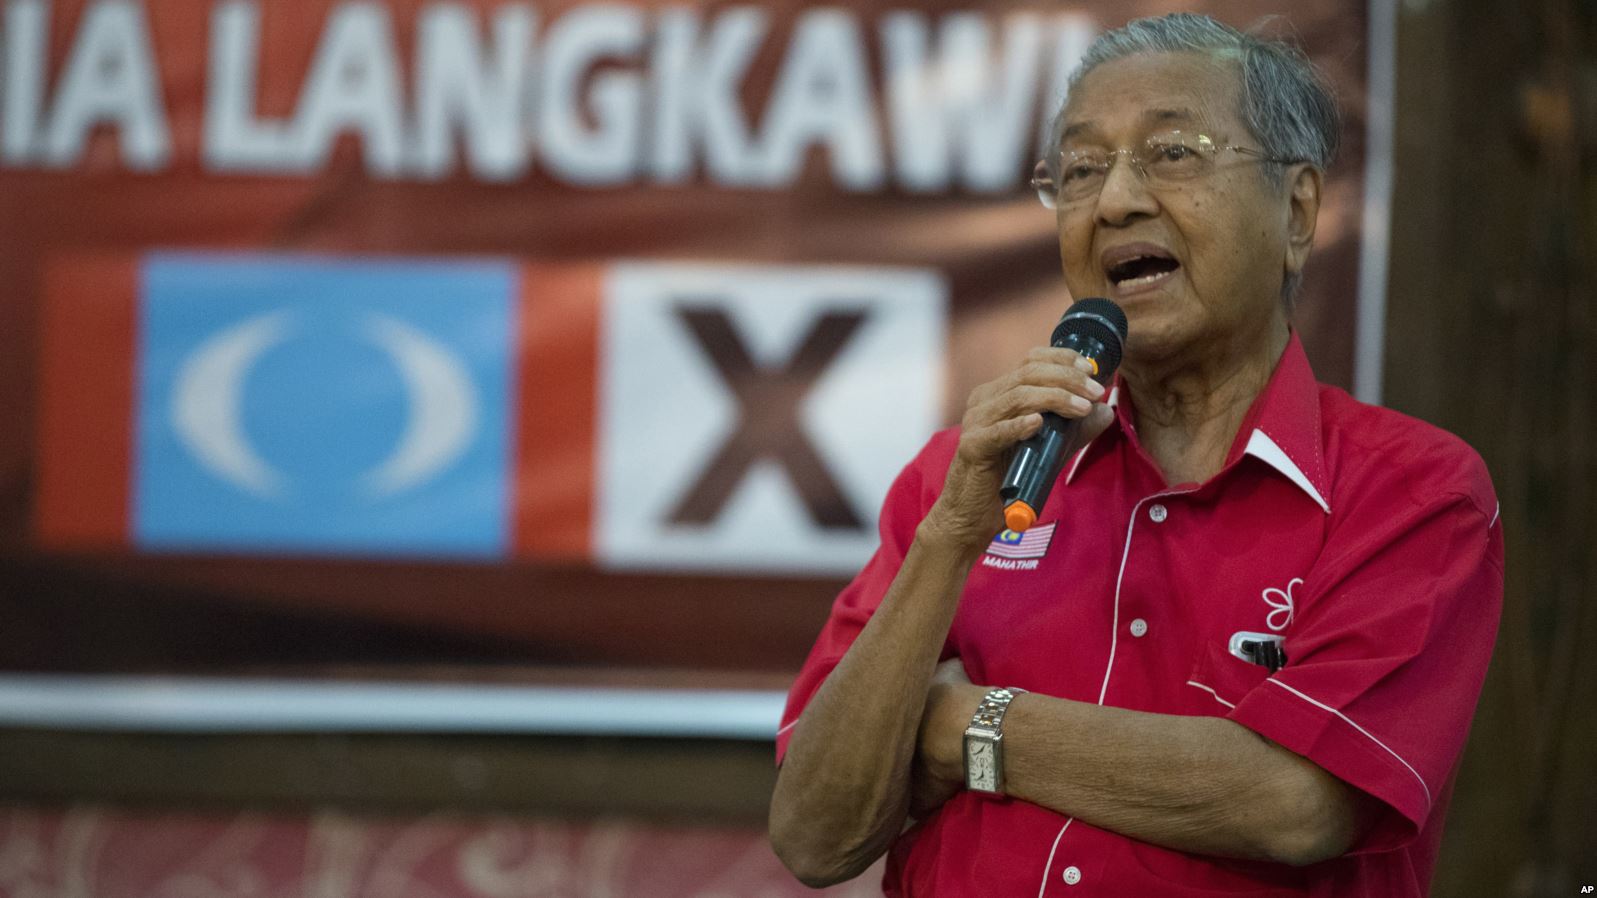 Former Malaysian leader Mahathir Mohamad speaks at a local community in Langkawi, Malaysia, April 27, 2018. In an unlikely comeback, he's switched sides in Malaysian politics, coming out of retirement to unite an opposition that’s seeking to end his former party’s 60-year hold on power and oust his protege, Prime Minister Najib Razak, in May 9 elections. / 1MDB